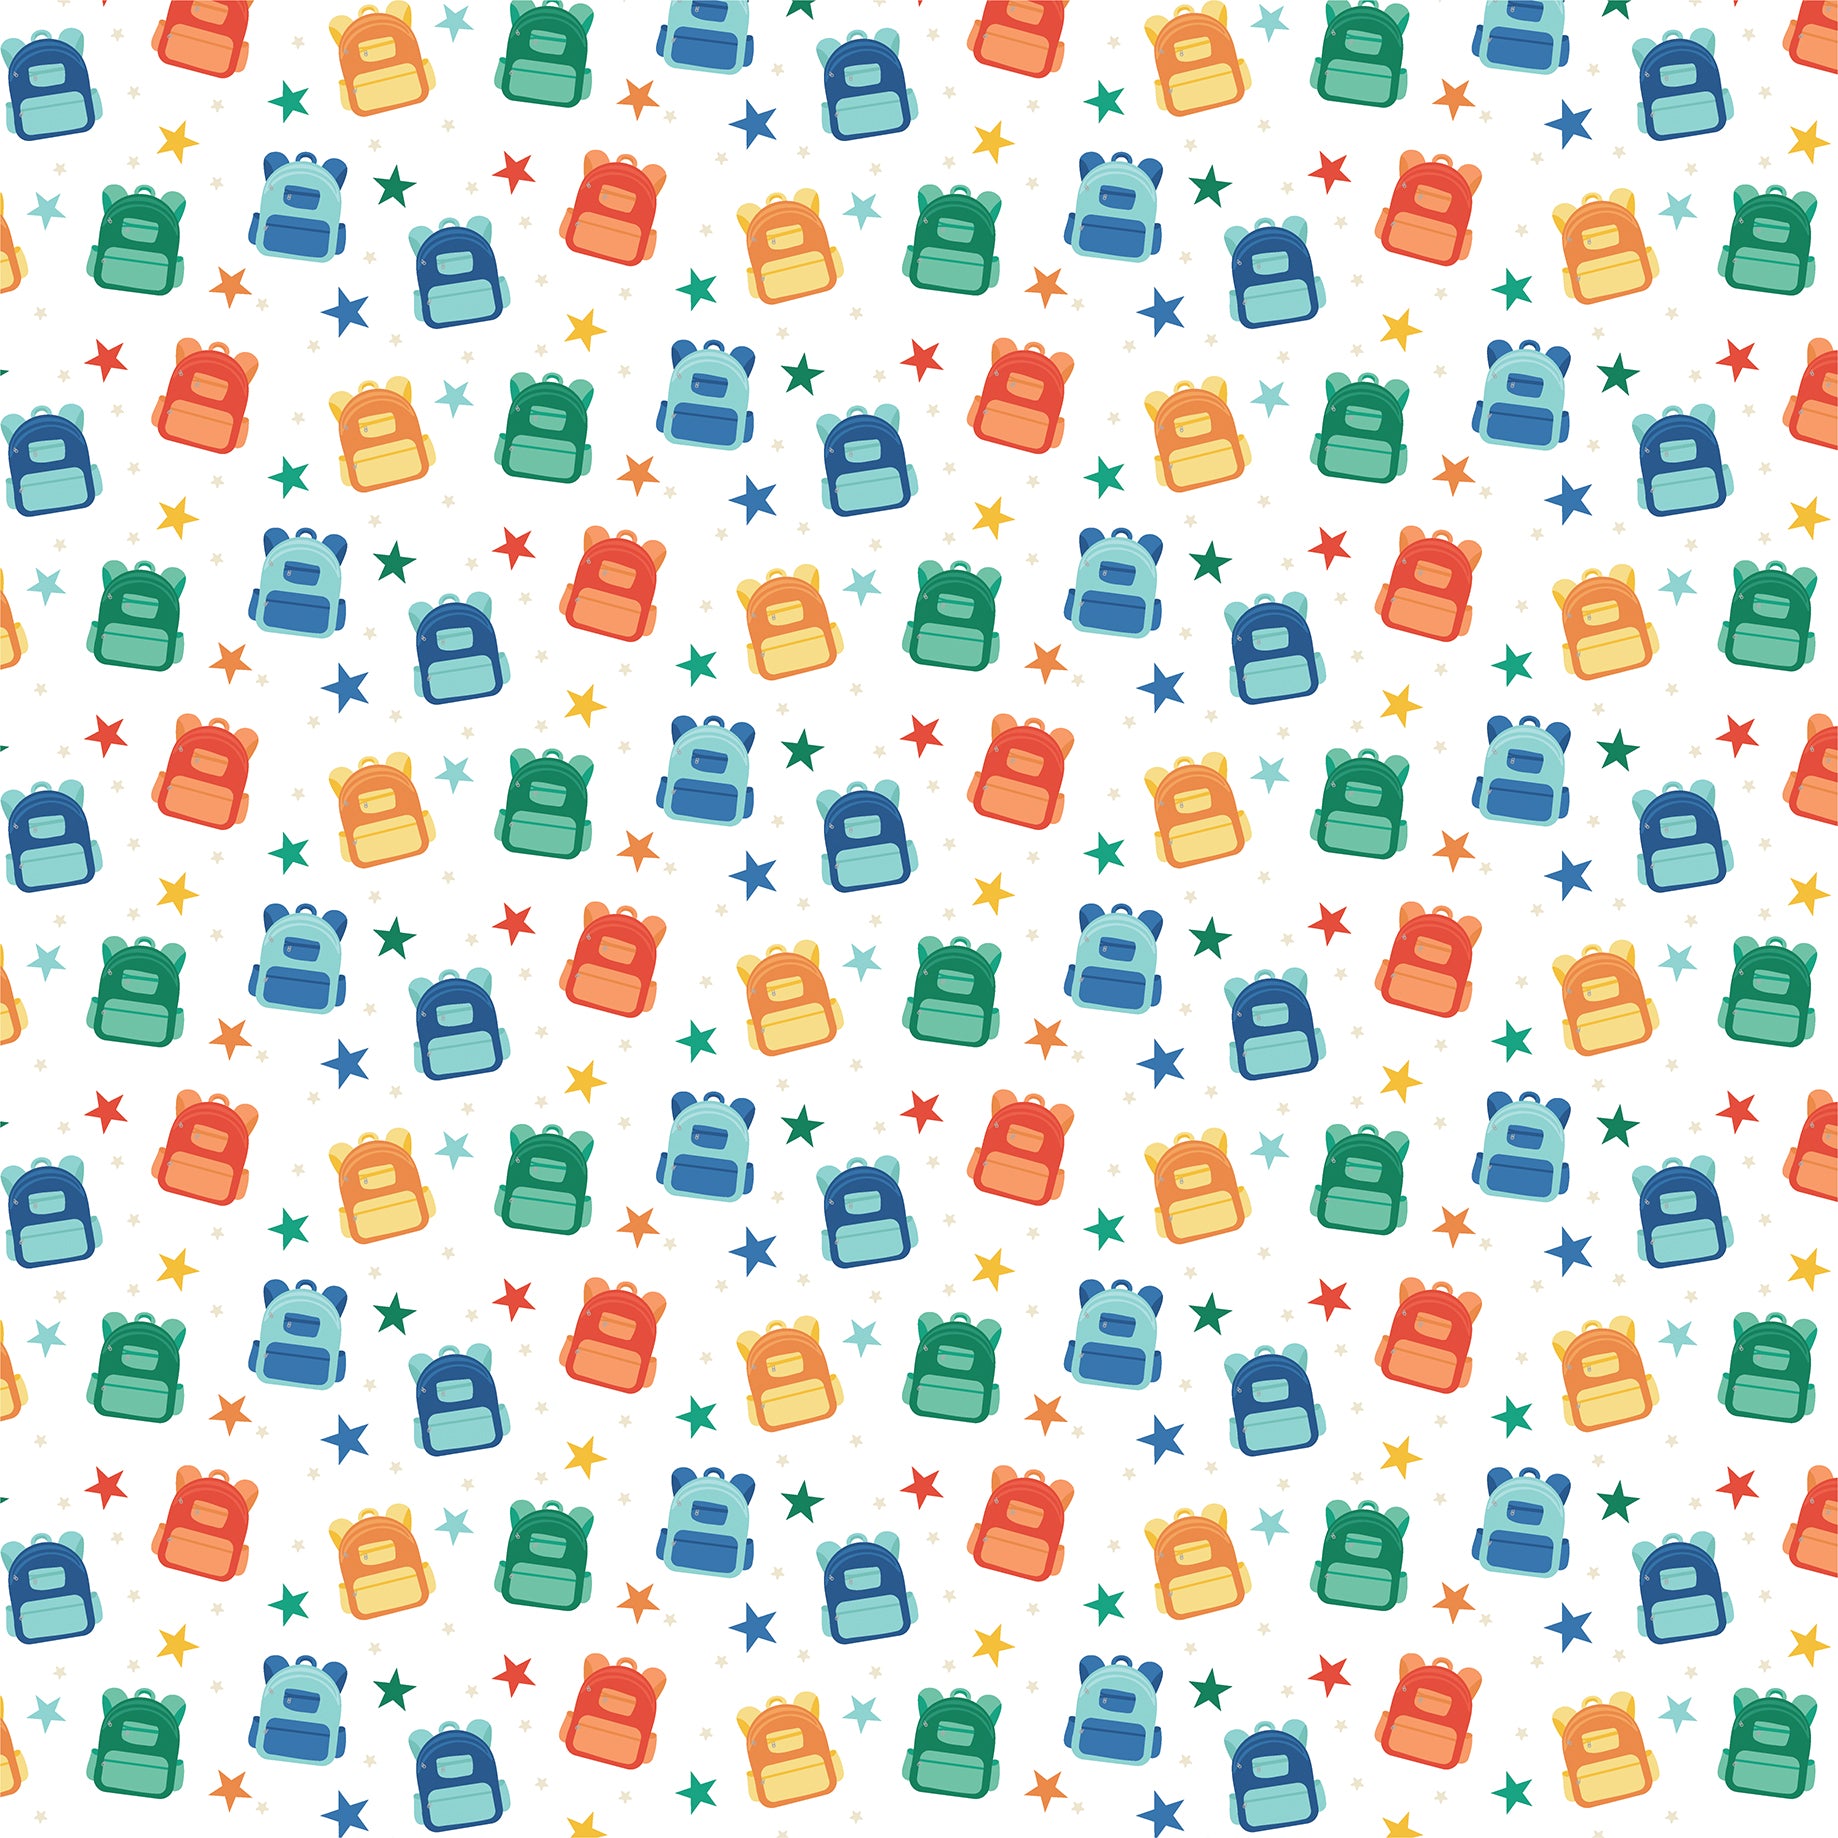 Off to School Collection Star Backpack 12 x 12 Double-Sided Scrapbook Paper by Echo Park Paper